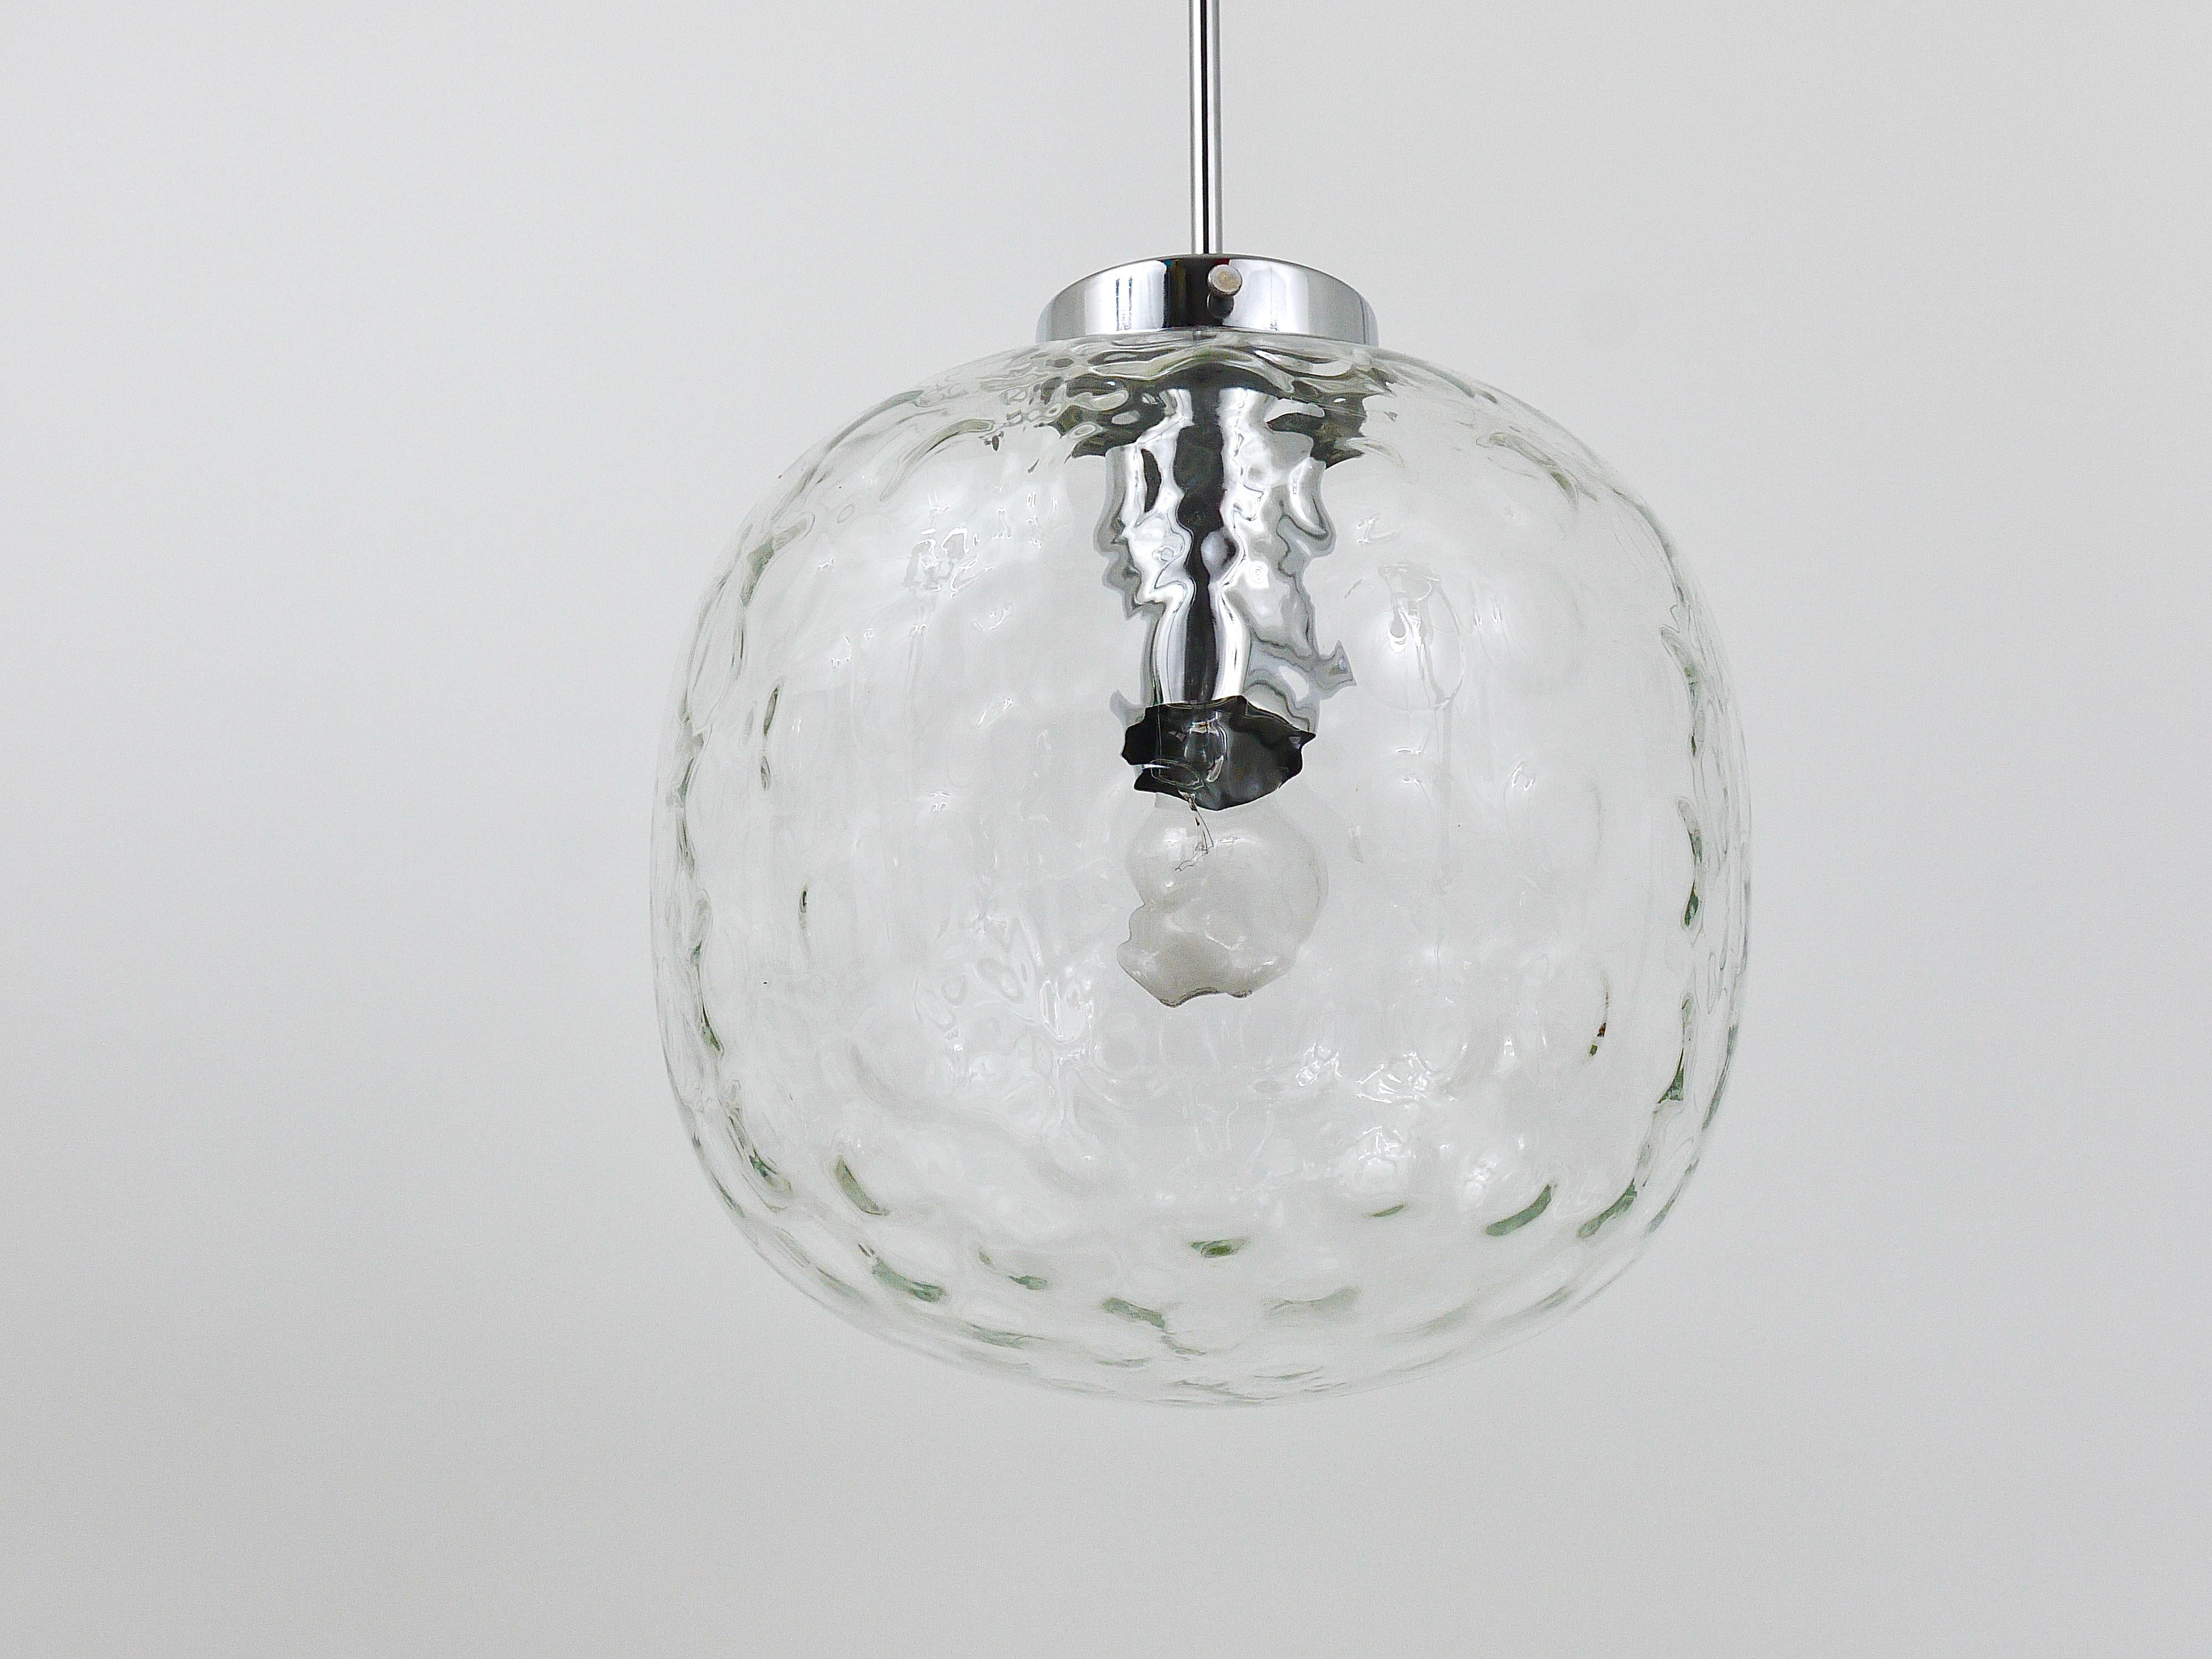 Large Bubble Melting Glass and Chrome Globe Pendant Lamp, Germany, 1970s For Sale 3